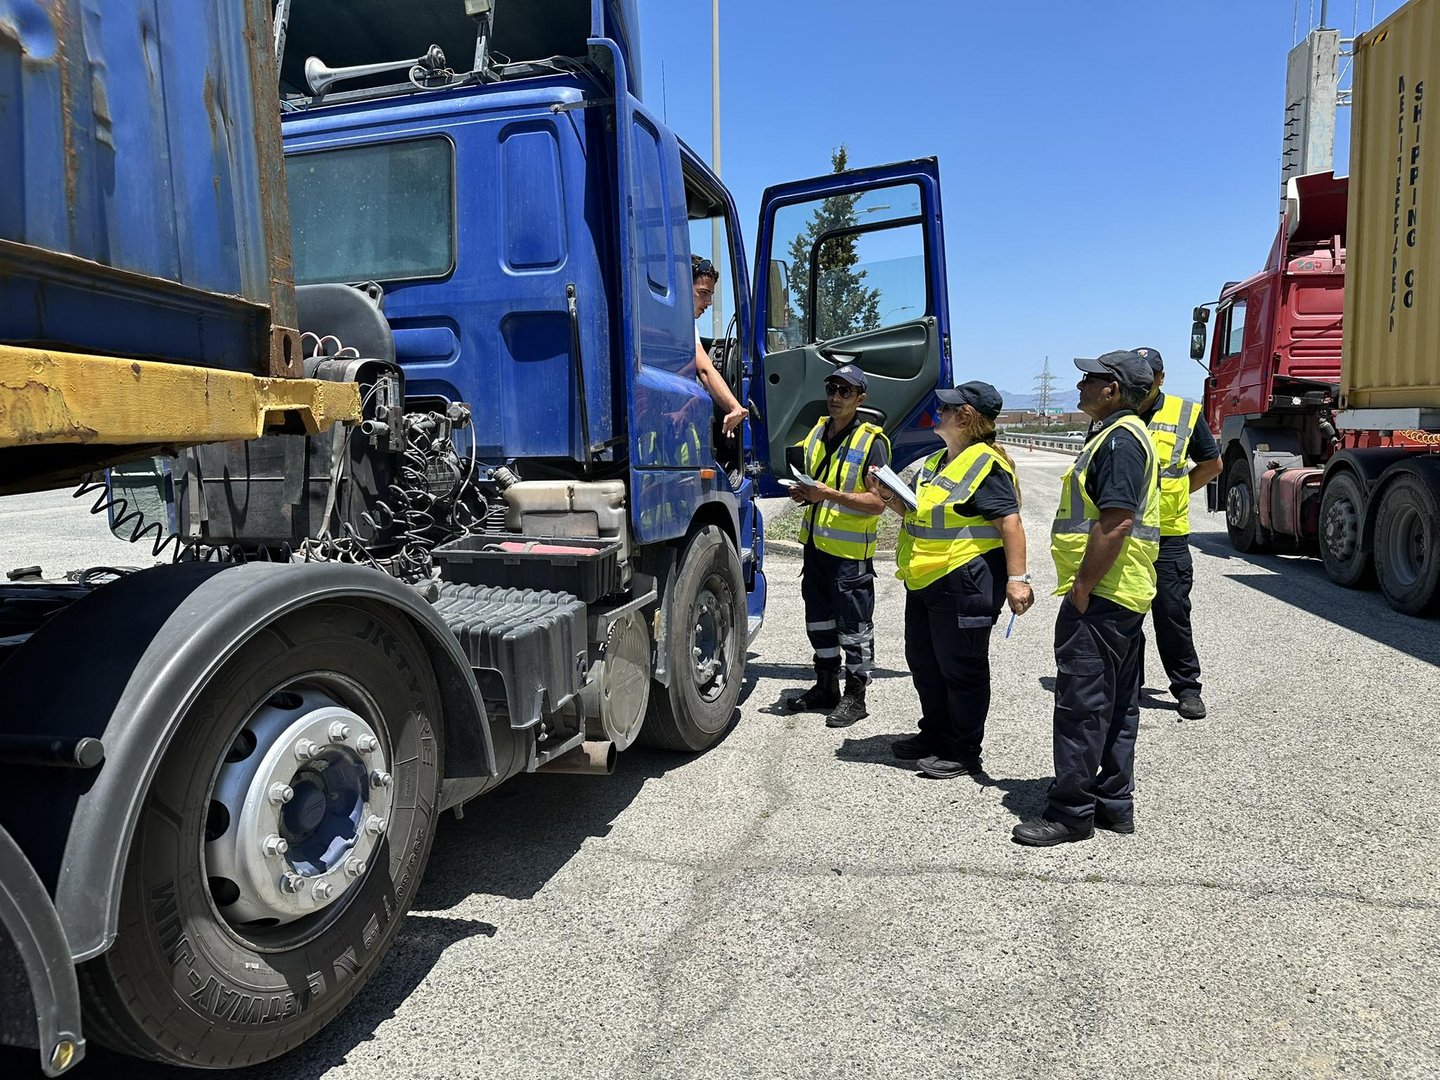 image 50 heavy vehicles given citations for violating industry standards